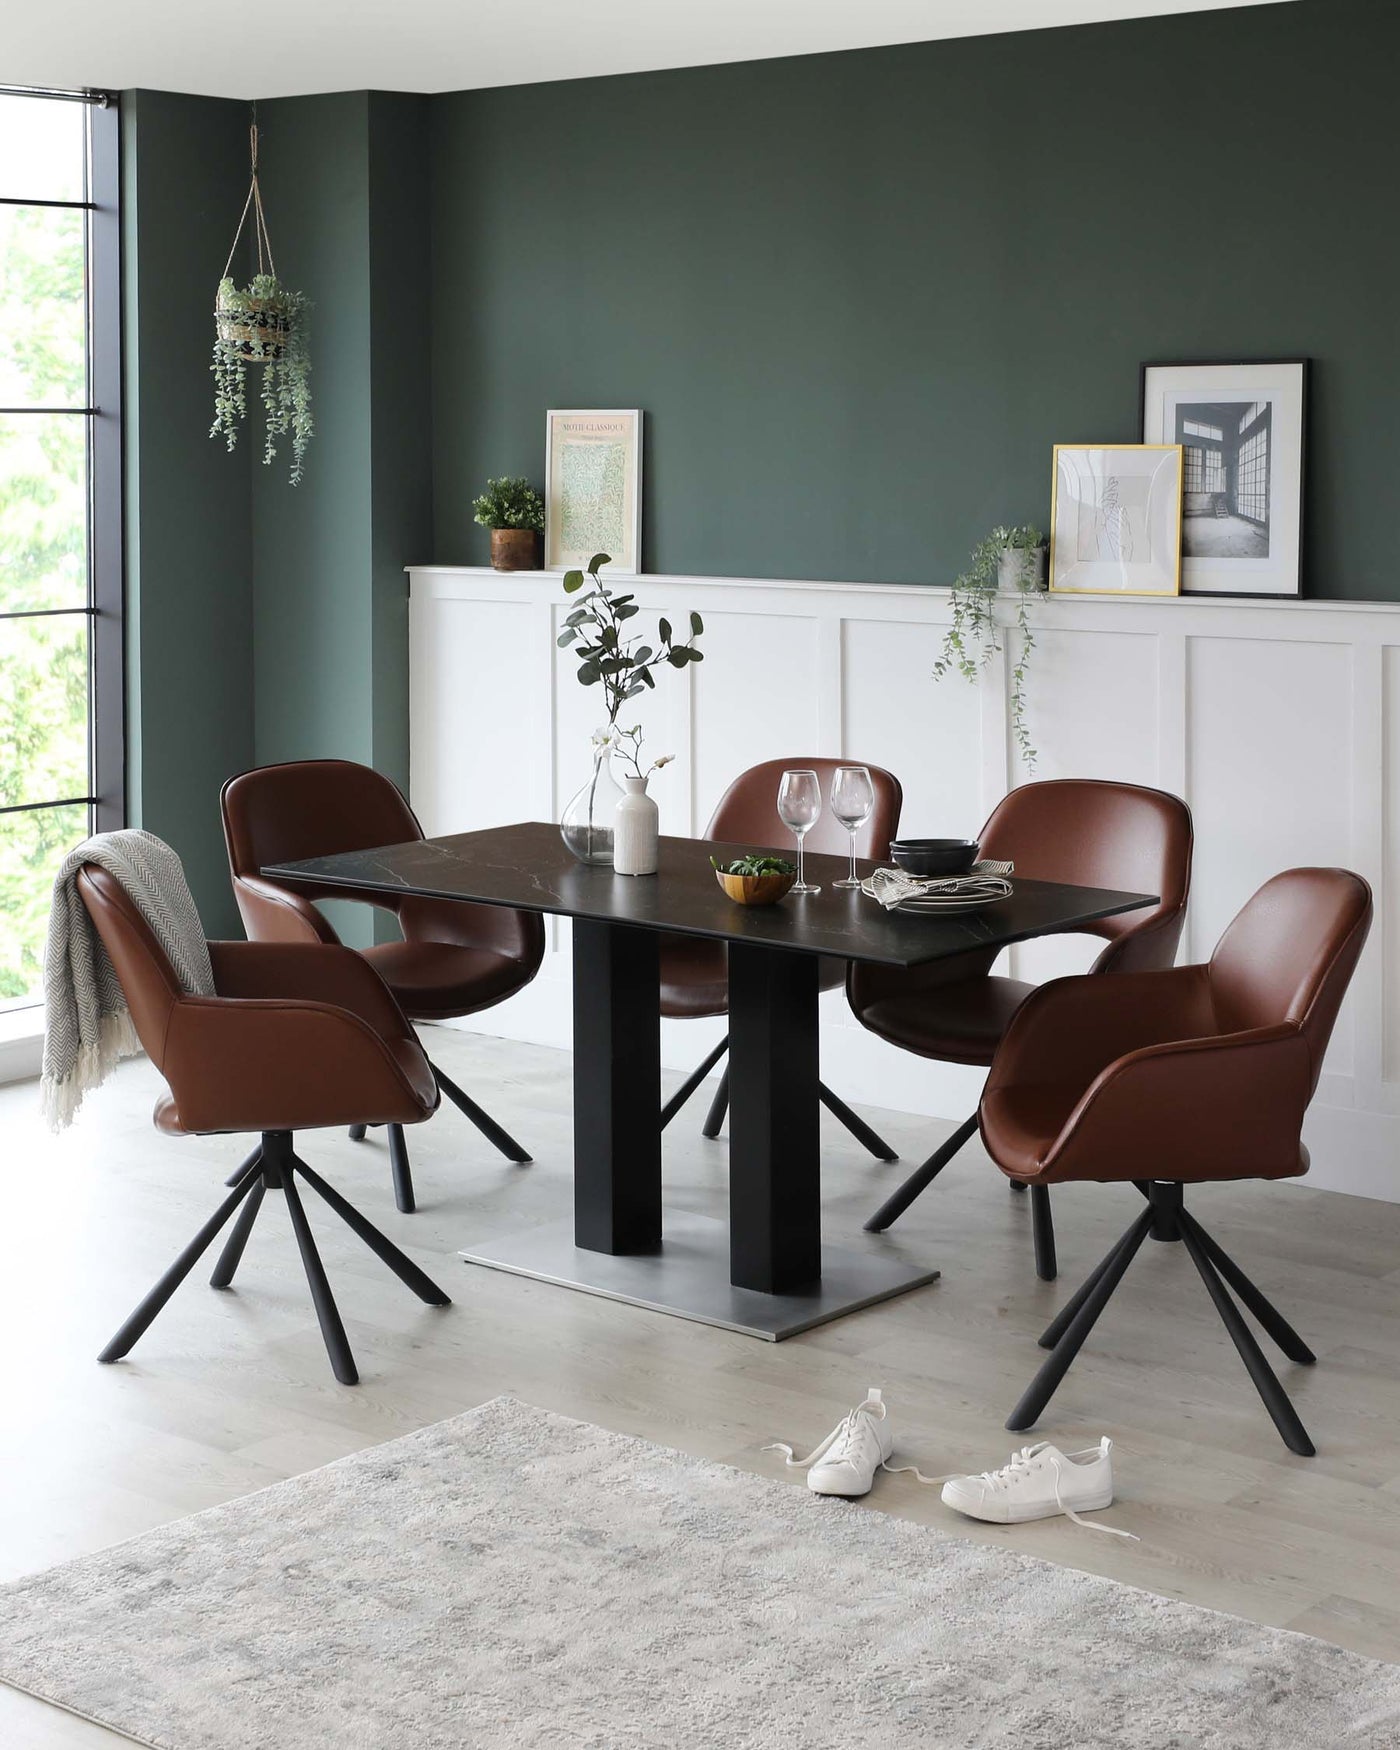 Modern dining room featuring a sleek rectangular table with a dark wood finish and bold black legs, surrounded by four elegant leather-upholstered chairs with black metal legs. A cosy beige rug underlays the set-up.